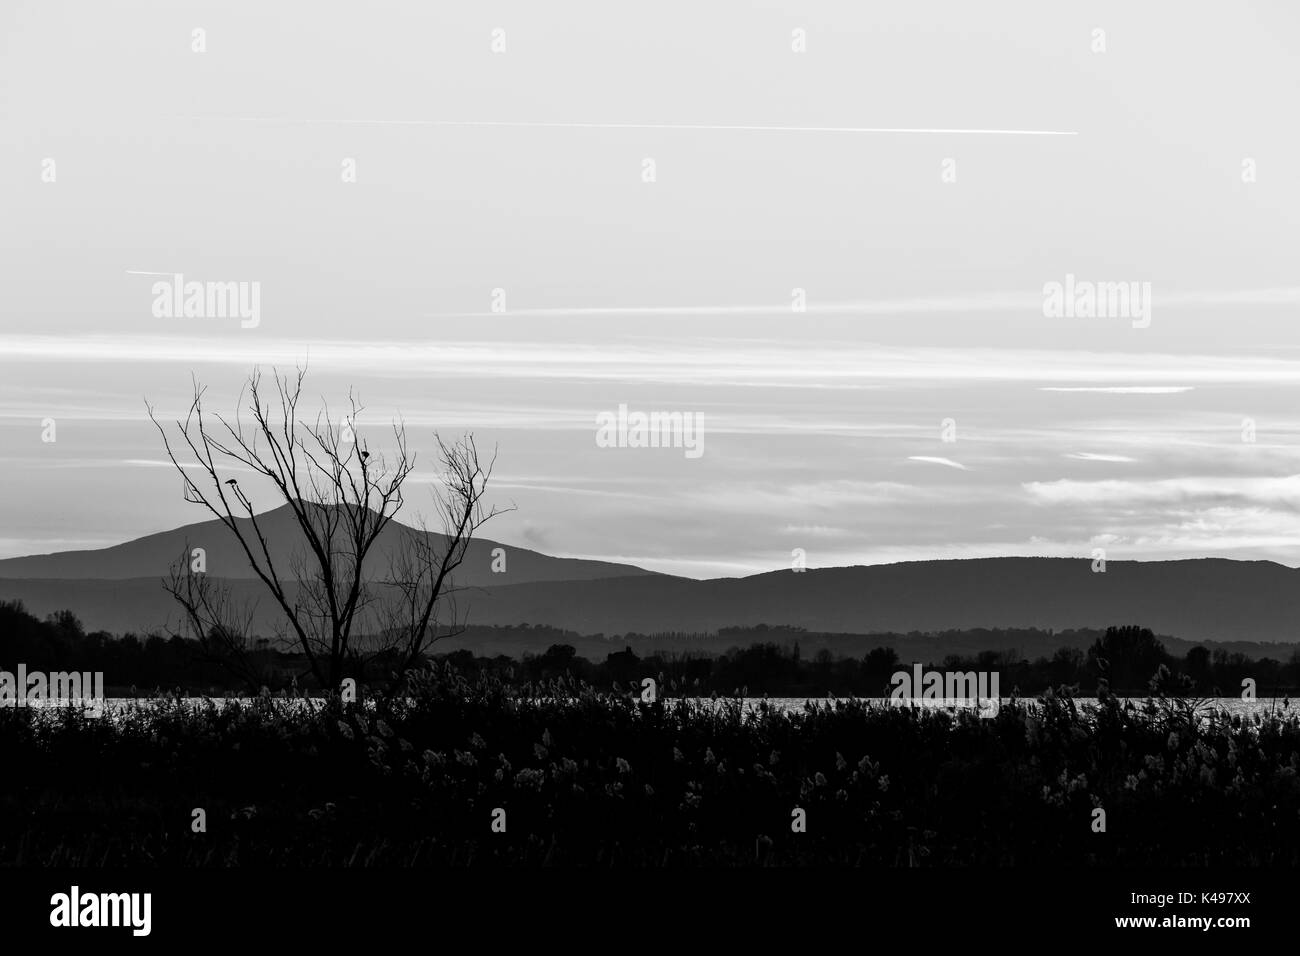 Tree silhouette and plants near a lake at dusk, with soft tones in the sky and distant hills Stock Photo